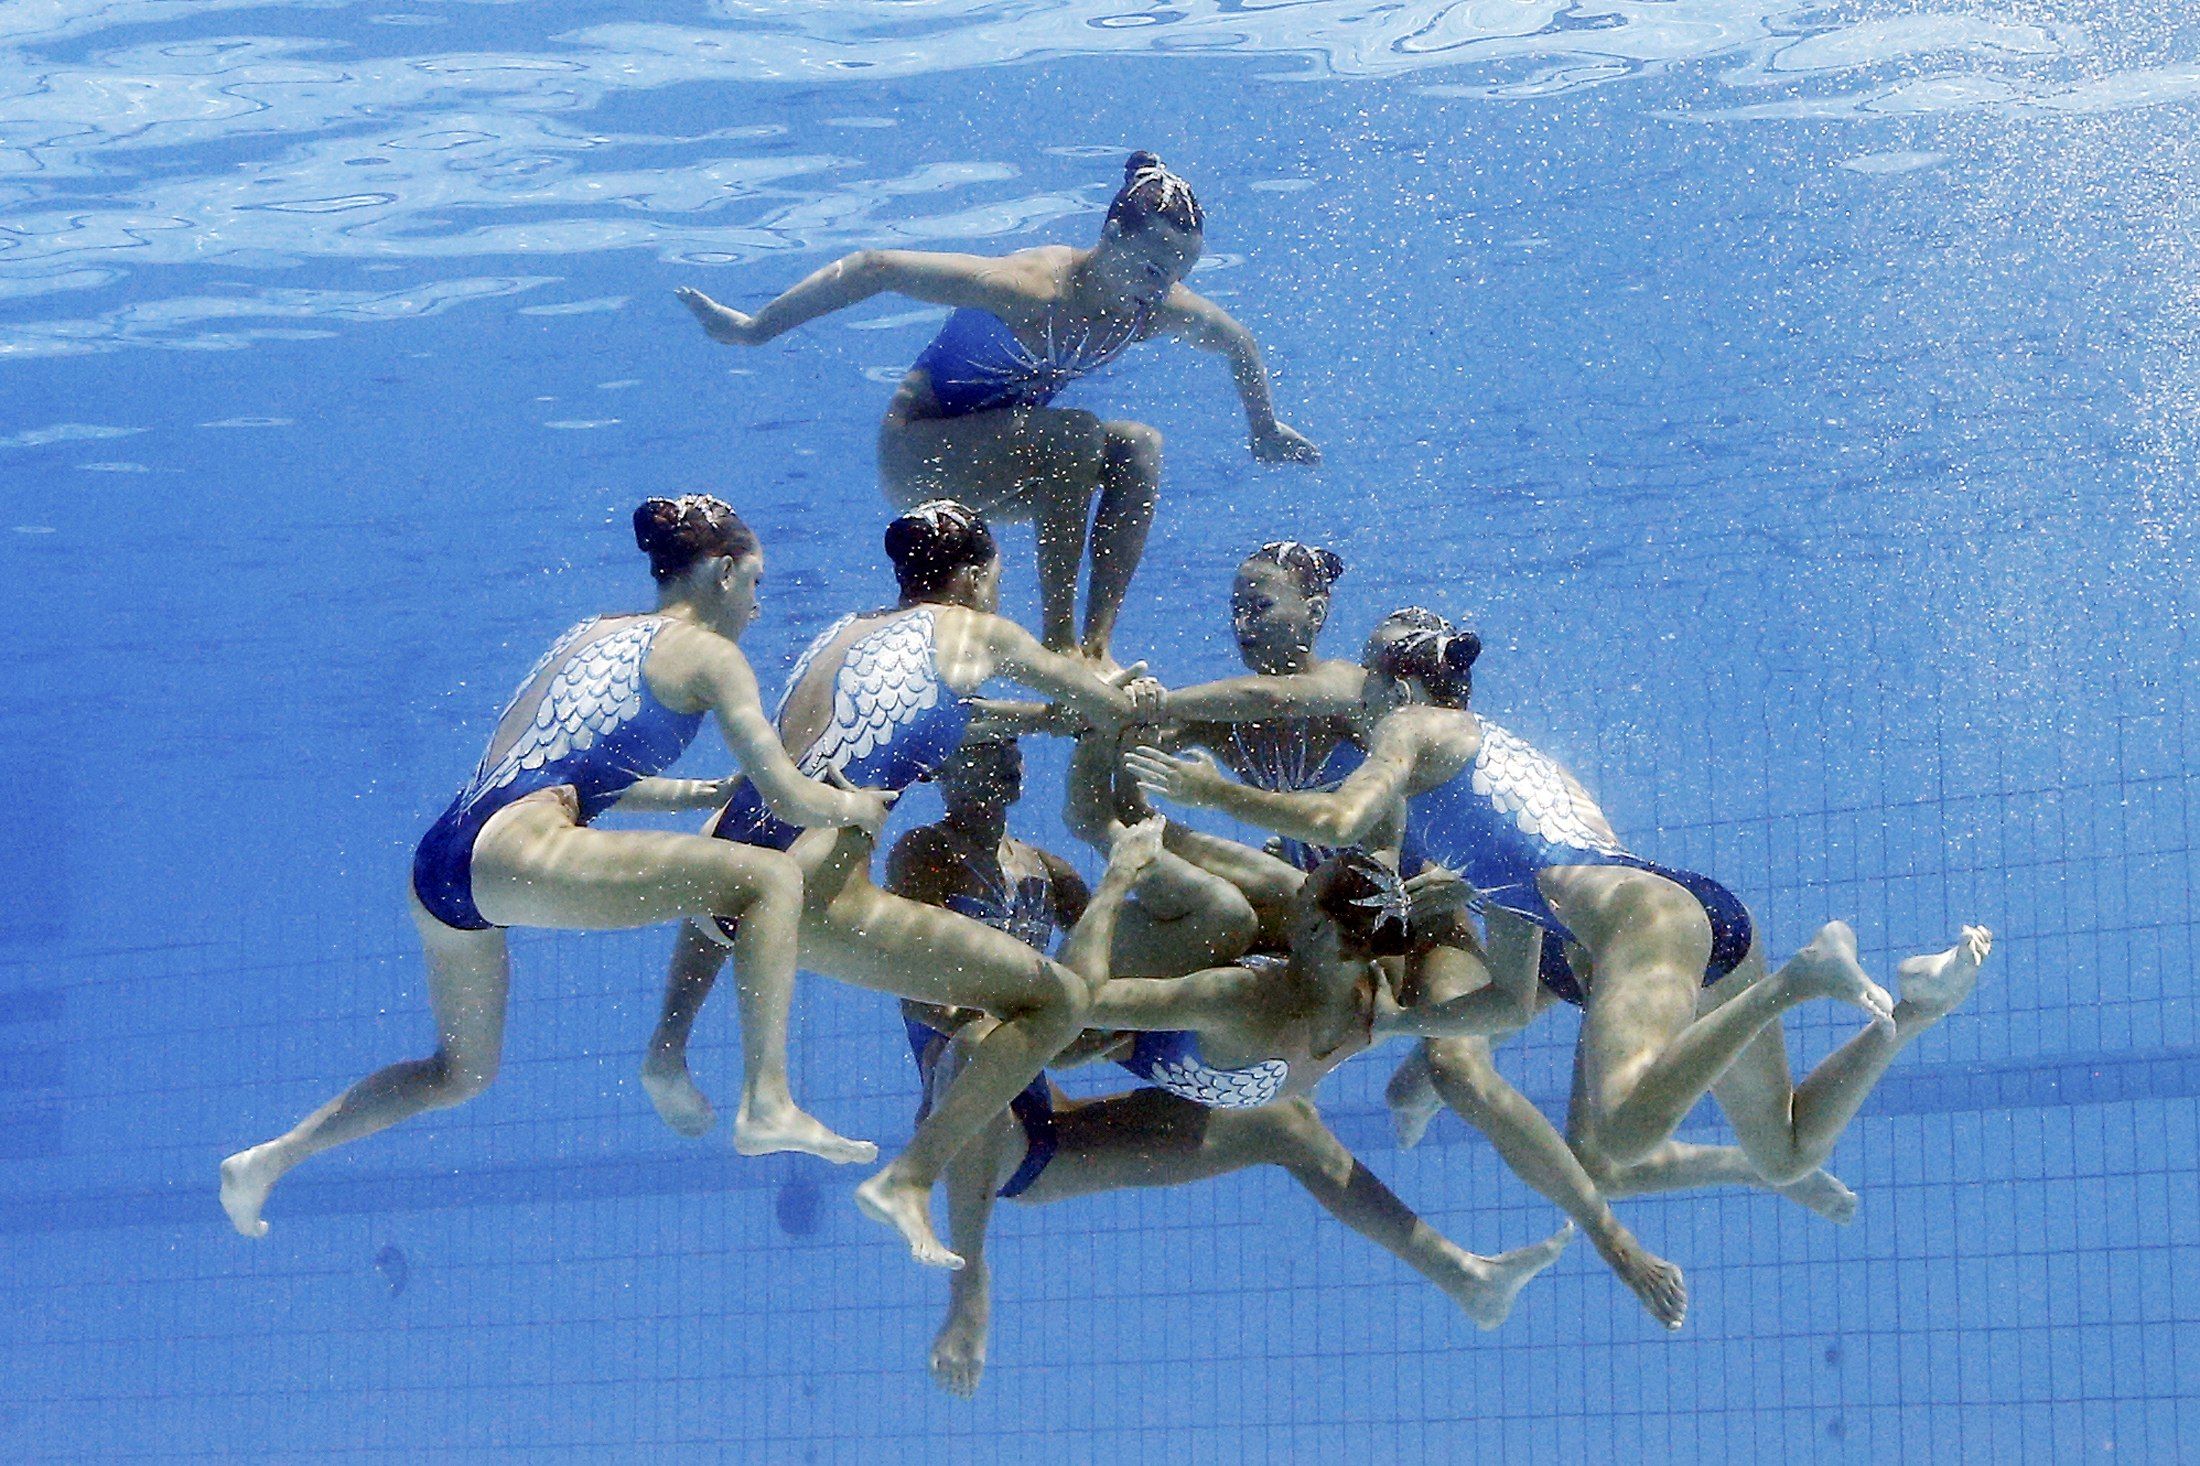 2016 Rio Olympics - Synchronised Swimming - Teams - Free Routine Final - Maria Lenk Aquatics Centre - Rio de Janeiro, Brazil - 19/08/2016. Team Russia (RUS) competes.  REUTERS/Stefan Wermuth    FOR EDITORIAL USE ONLY. NOT FOR SALE FOR MARKETING OR ADVERTISING CAMPAIGNS.